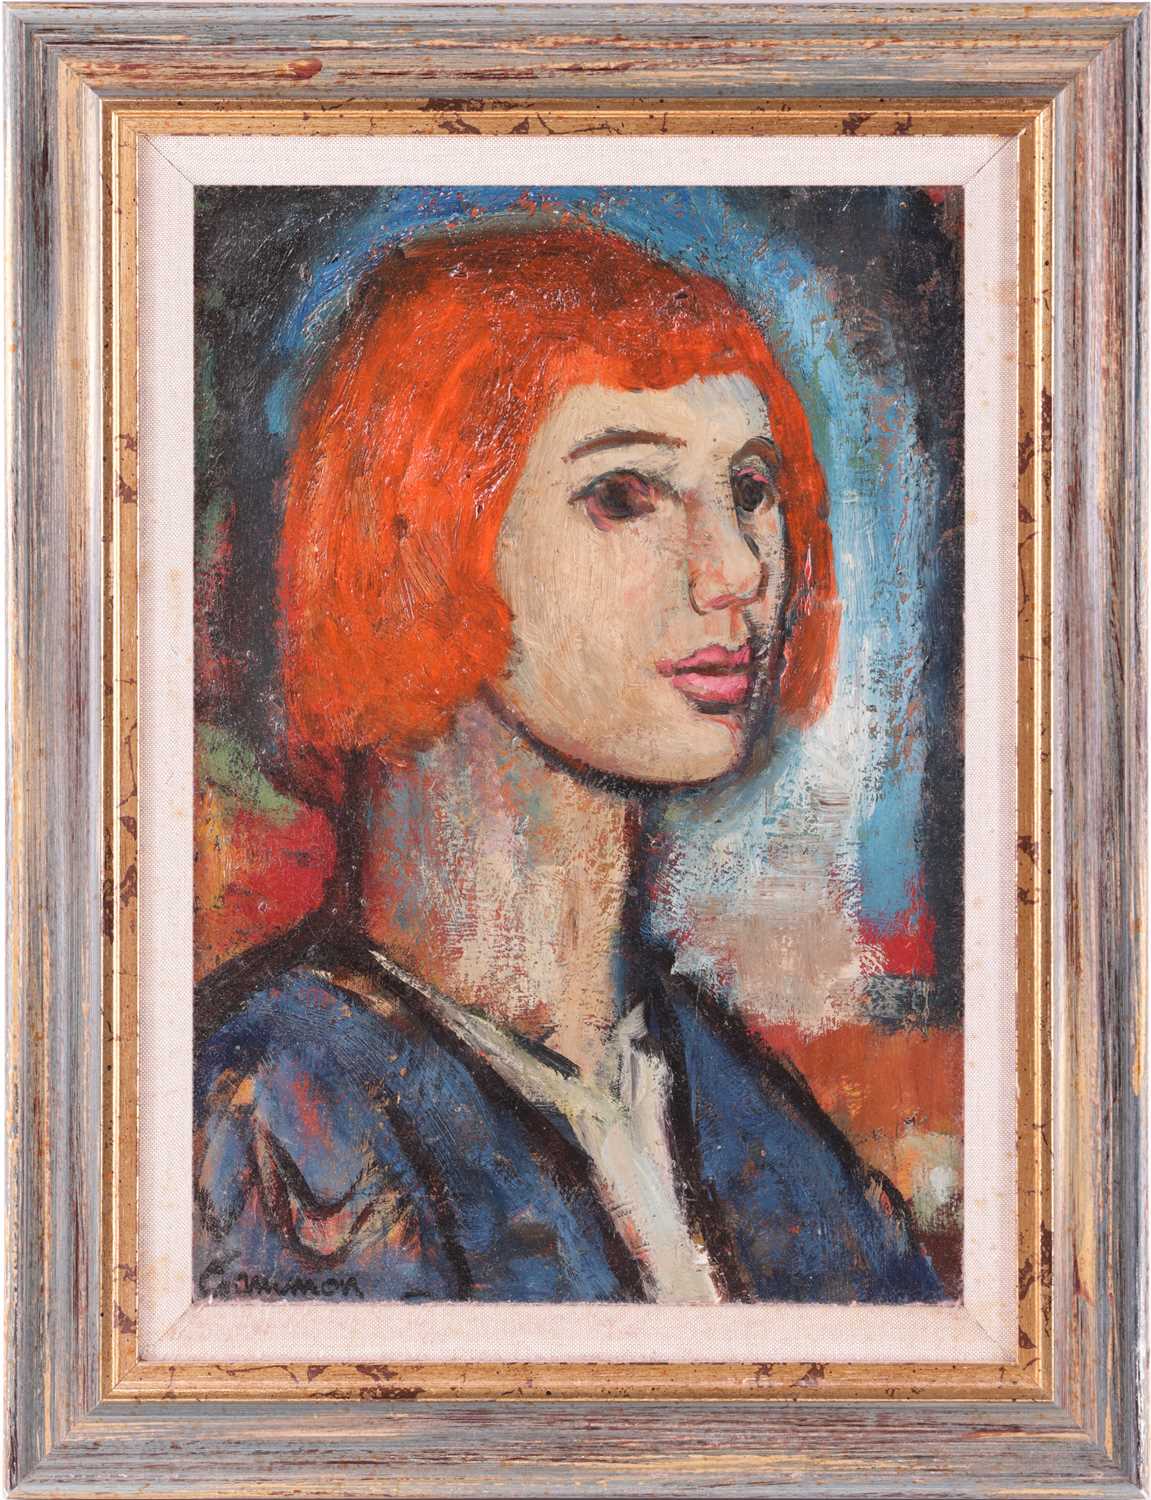 Reg Gammon (1894-1997), 'Girl with Red Hair', signed 'Gammon' (lower left), oil on board, 39 x 27 cm - Image 2 of 8